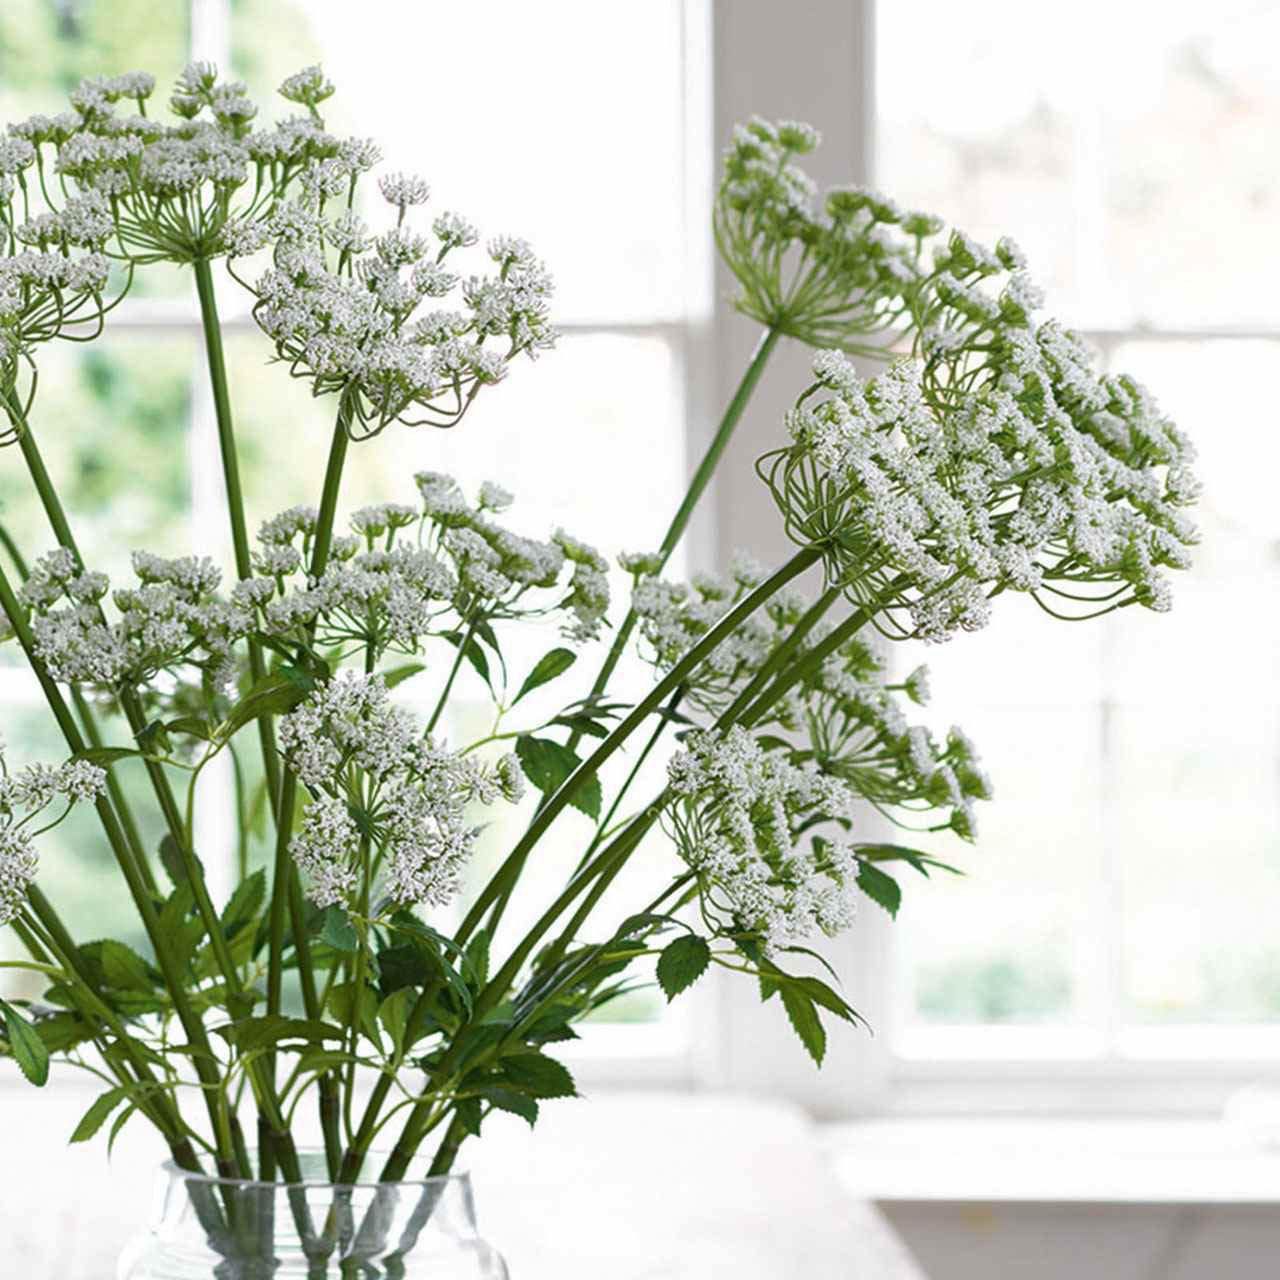 White Cow Parsley